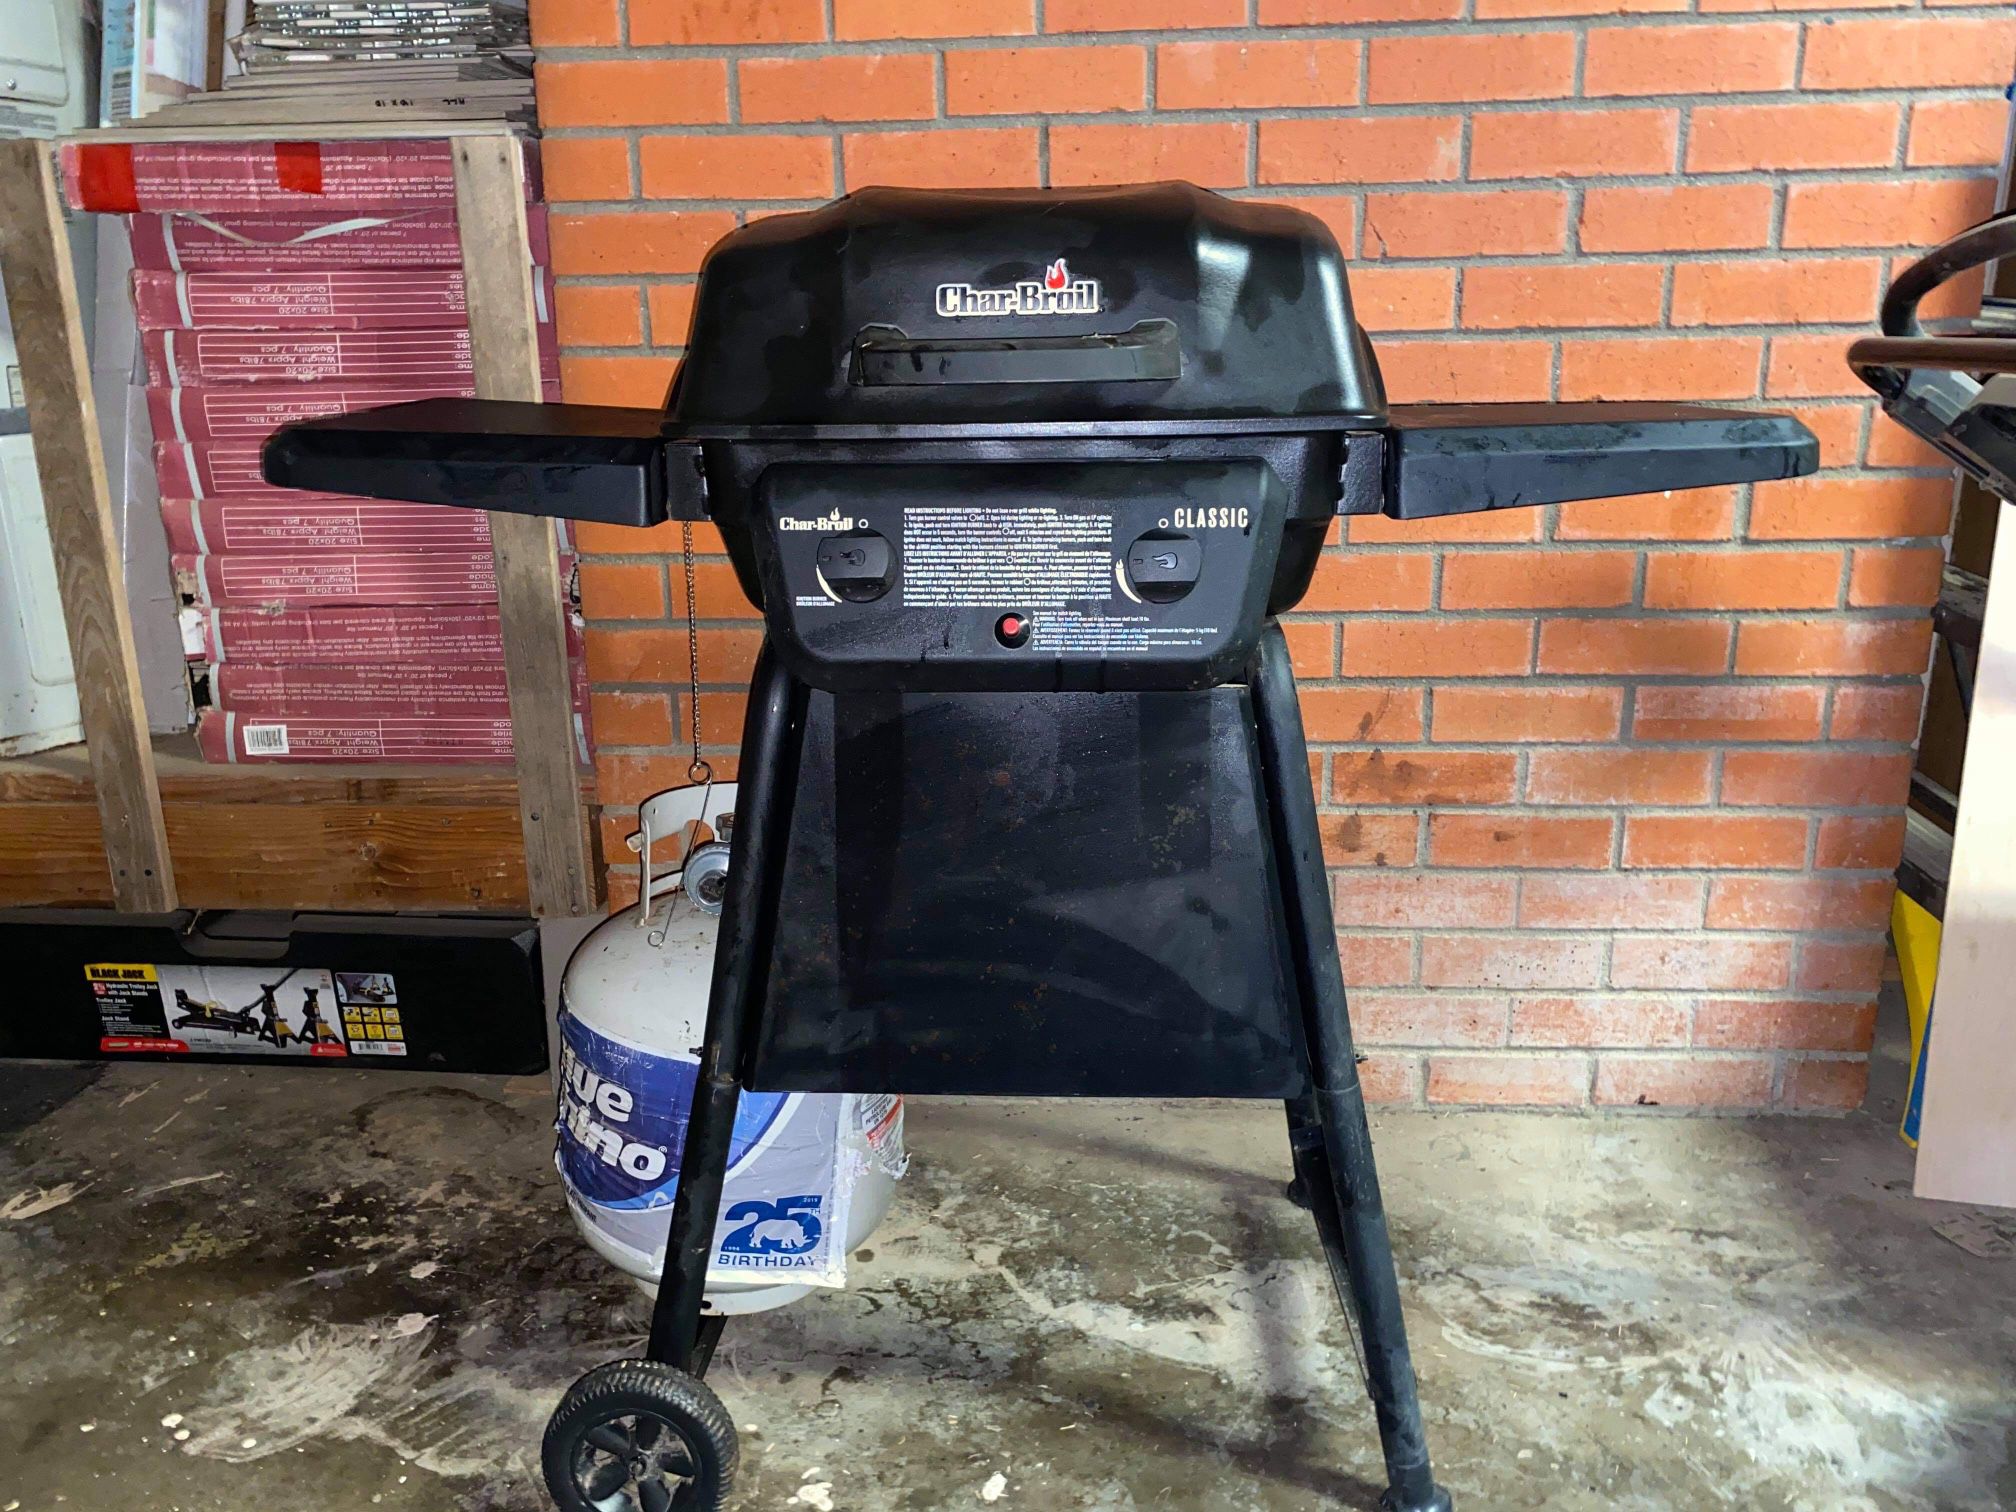 Charbroil dual Burner Propane Grill With Cover